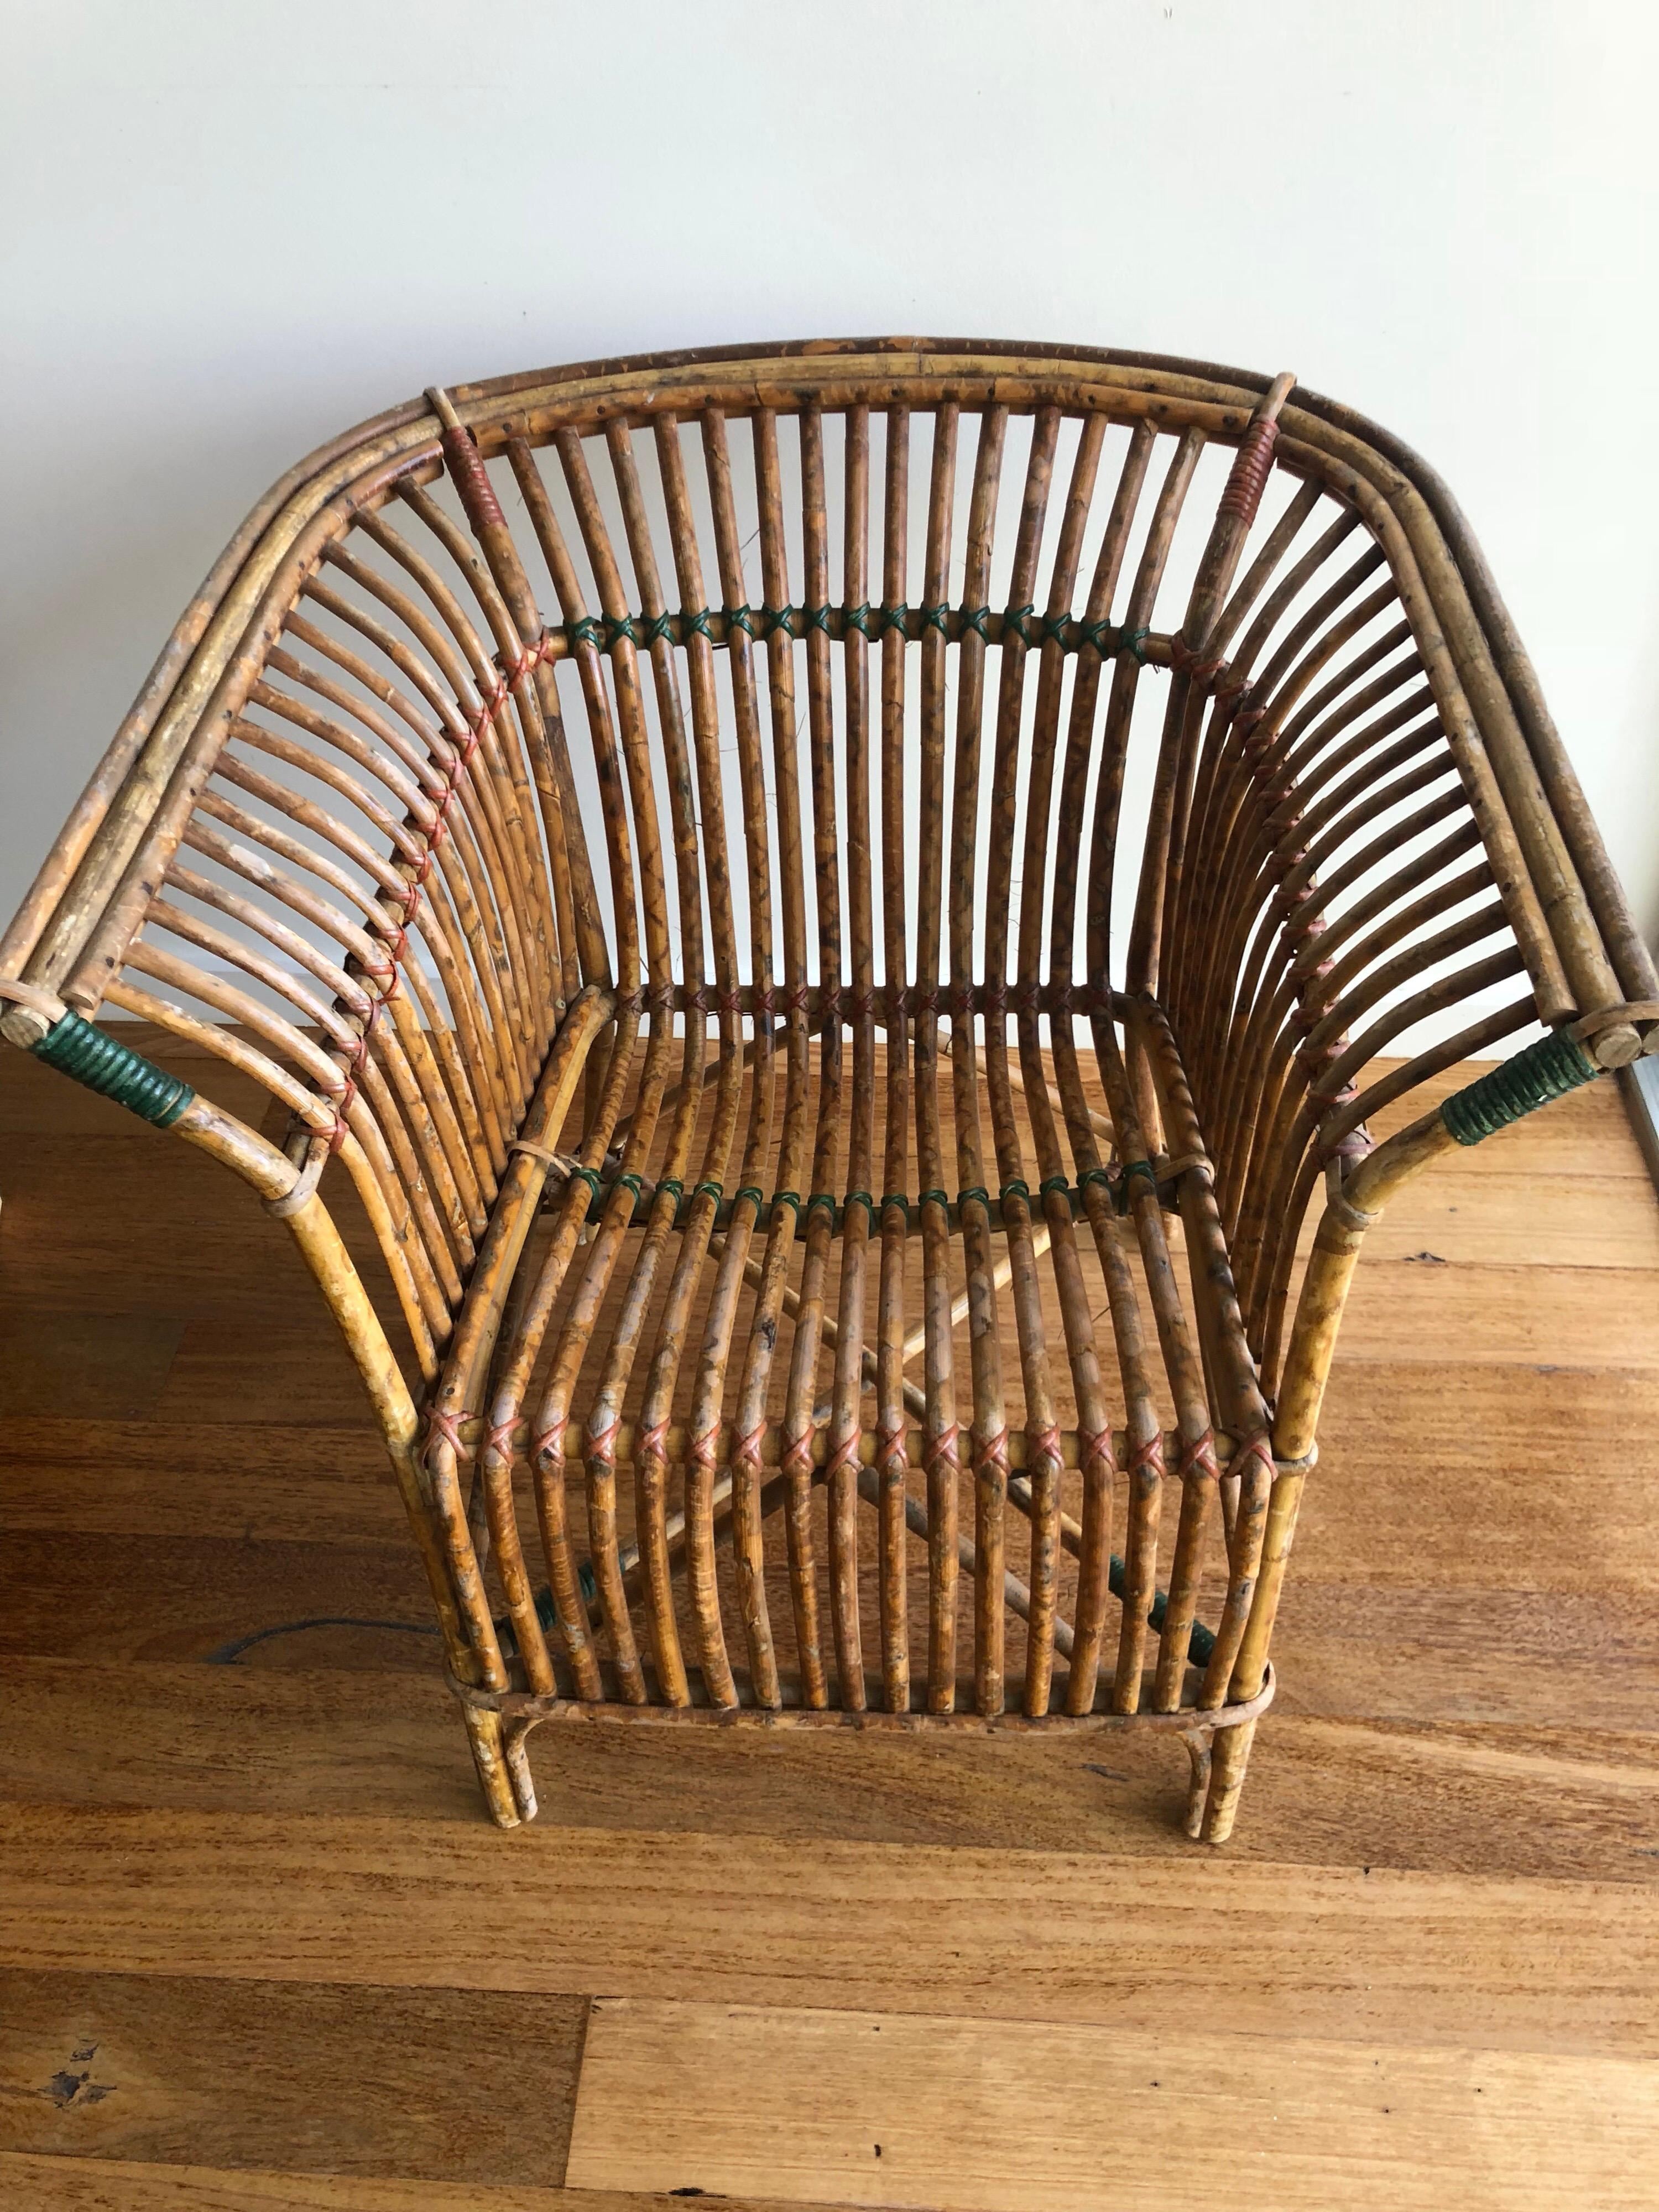 Antique Split Tiger Cane Armchair with Organic Fan Form Lines (Gehstock) im Angebot